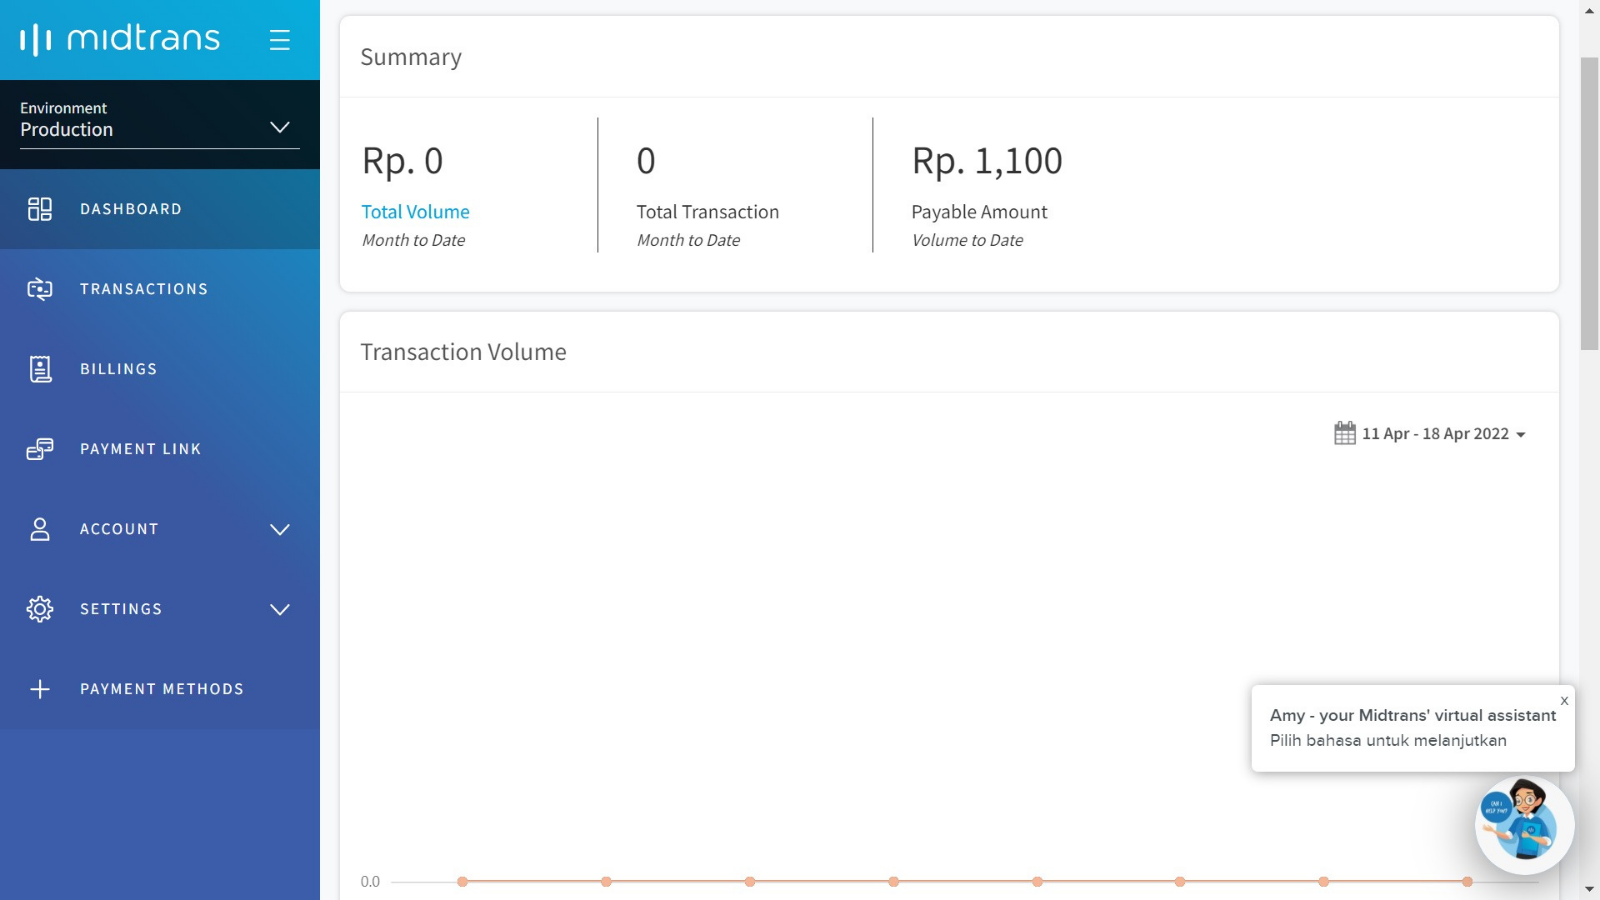 Dedicated merchant dashboard to monitor the transactions easily.